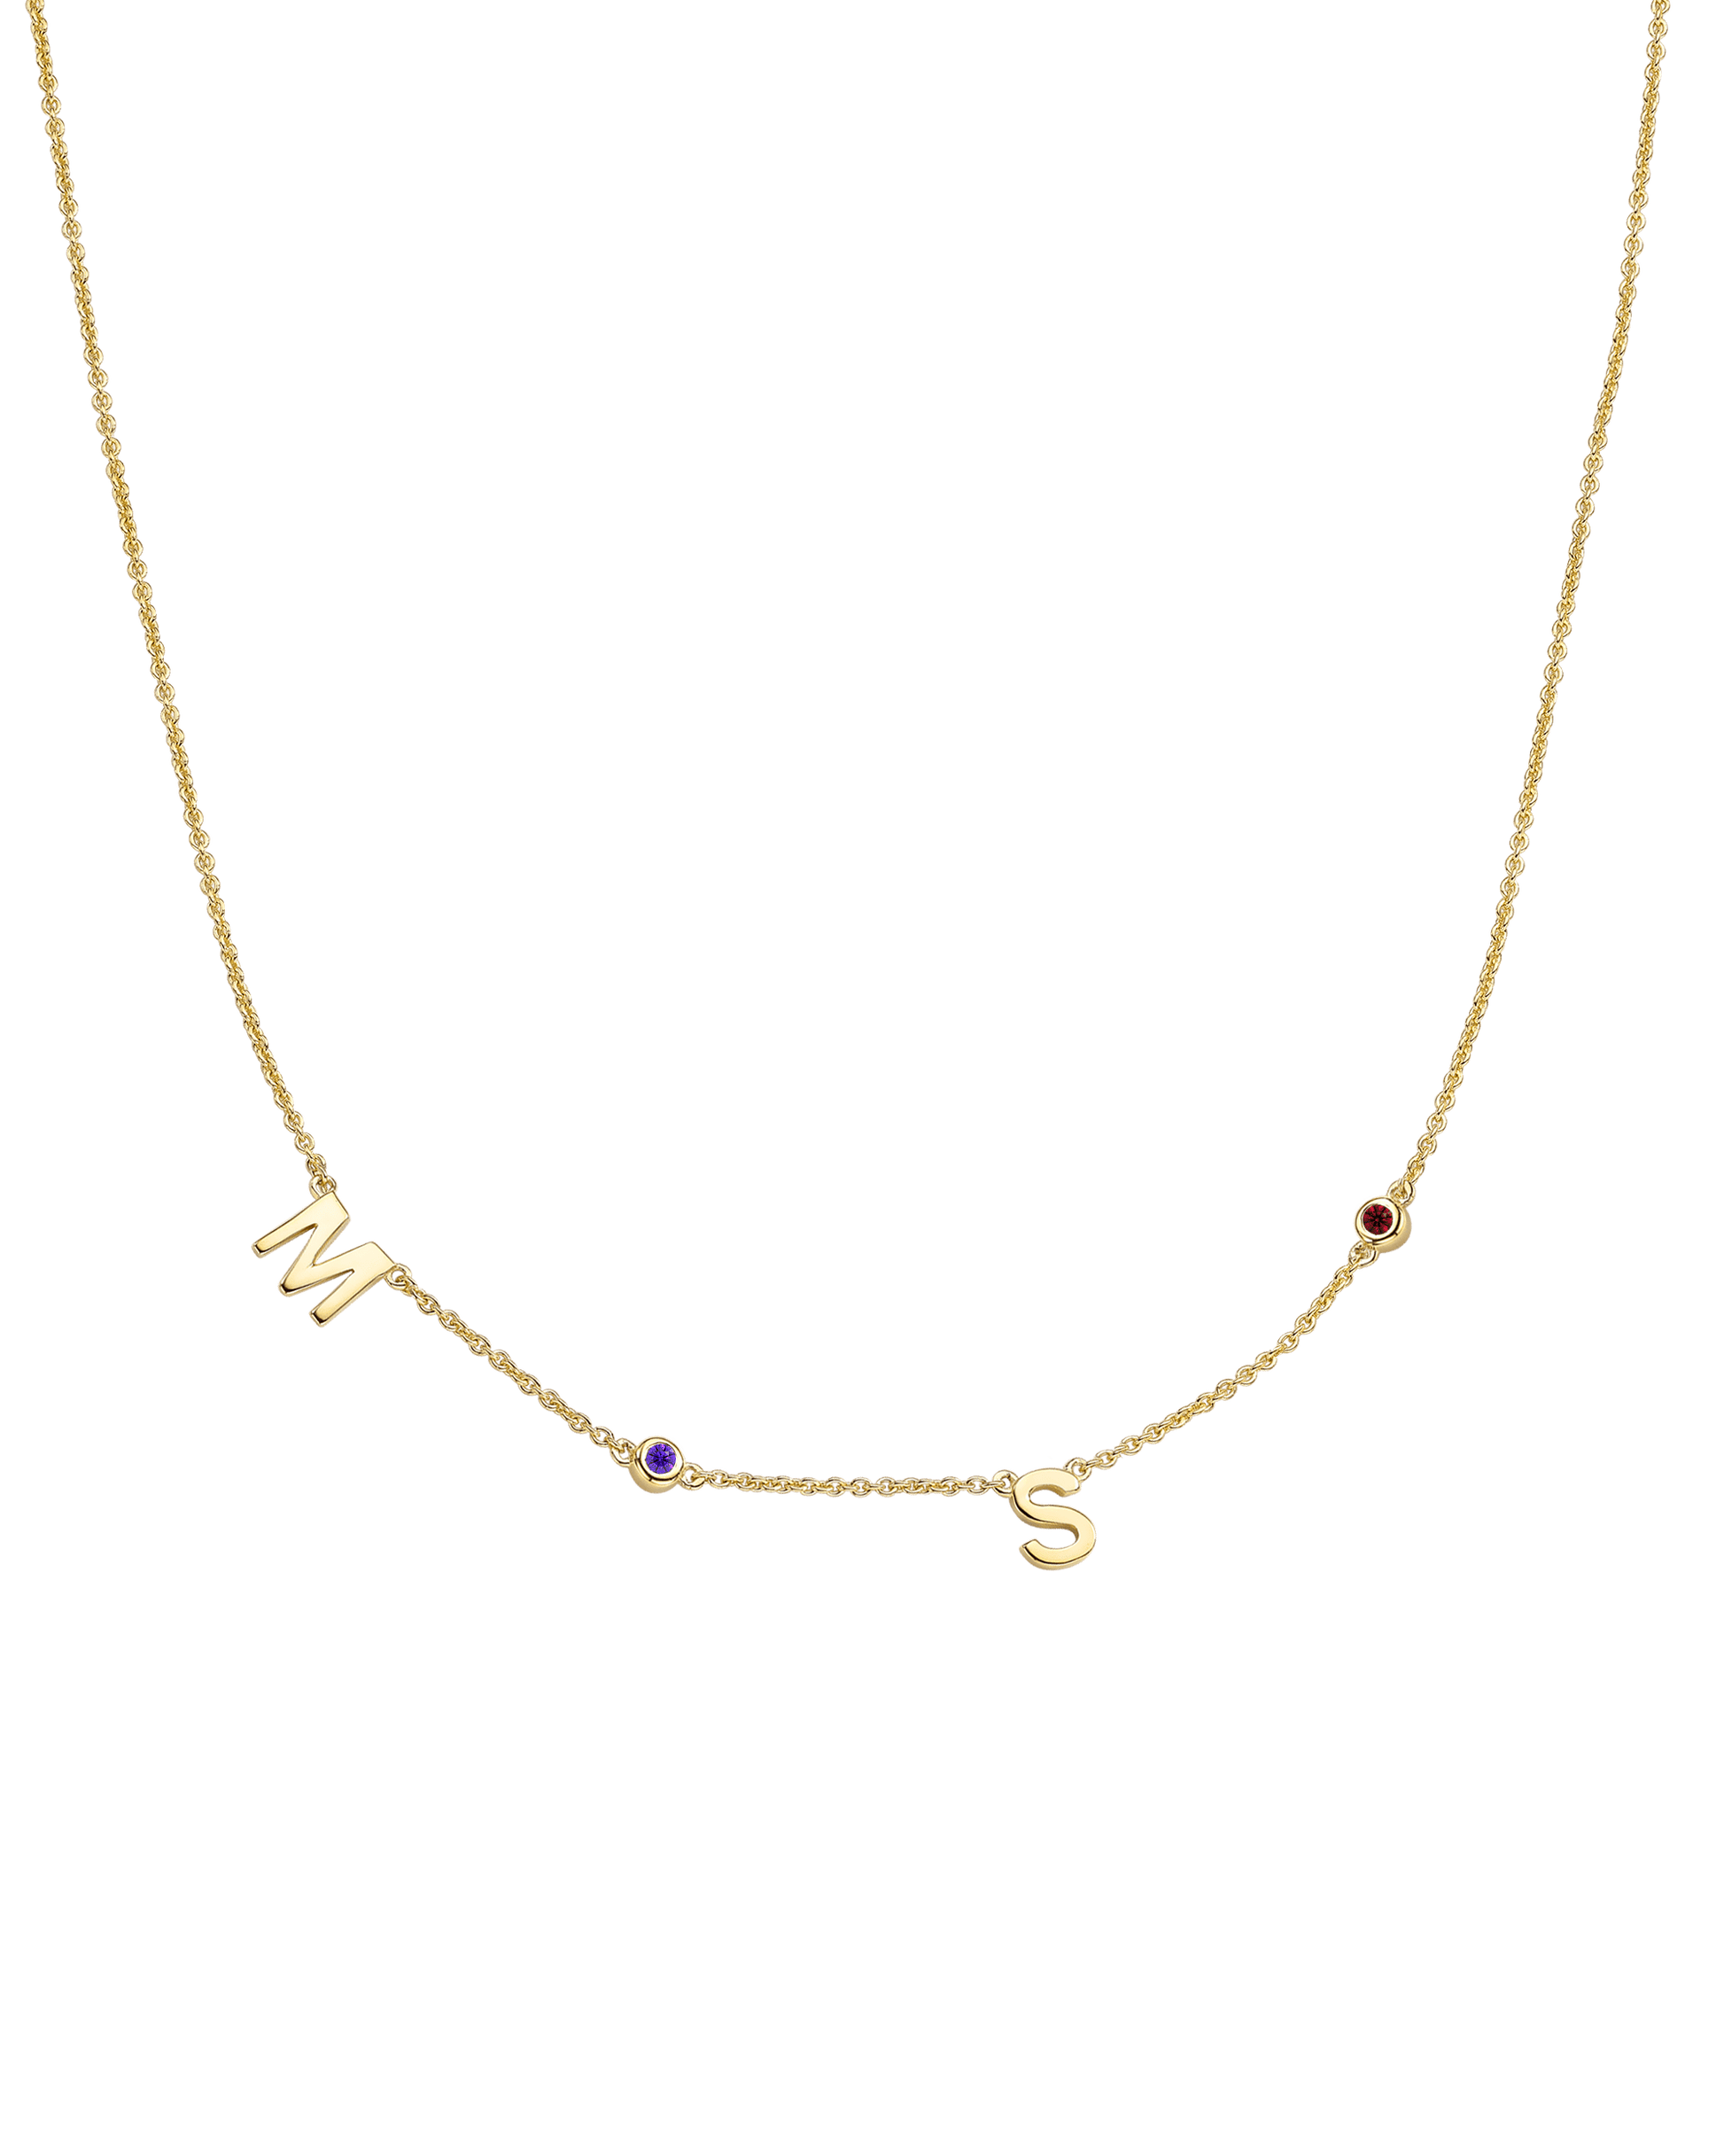 Initial Birthstone Necklace - 14K Yellow Gold Necklaces magal-dev 2 Initials + 2 Birthstones Adjustable 16-17" (40cm-43cm) 